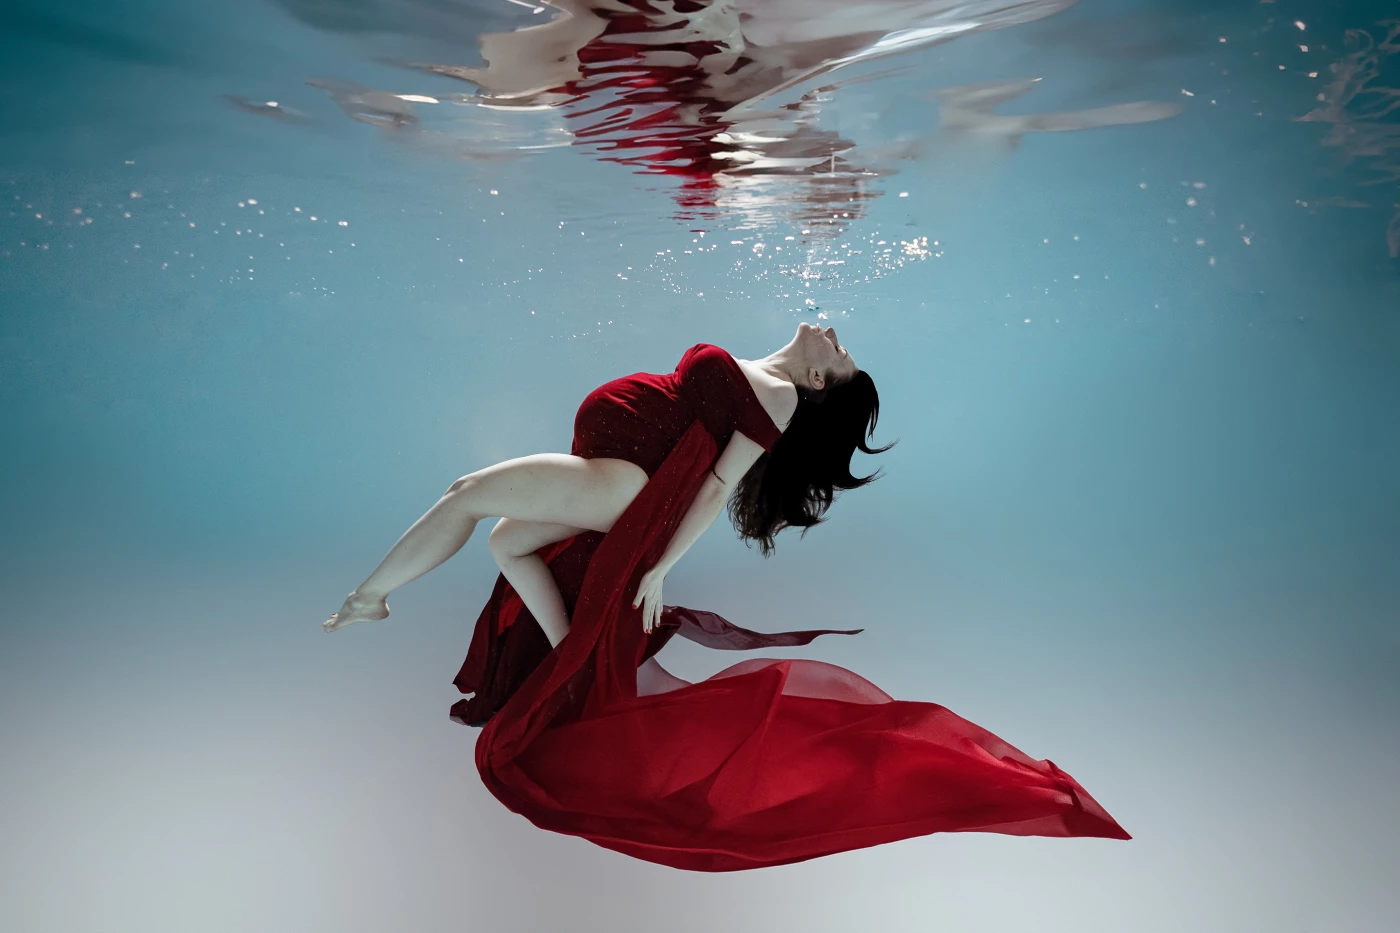 Weightless, graceful, elegant, and strong are some of the characteristics of underwater photography.